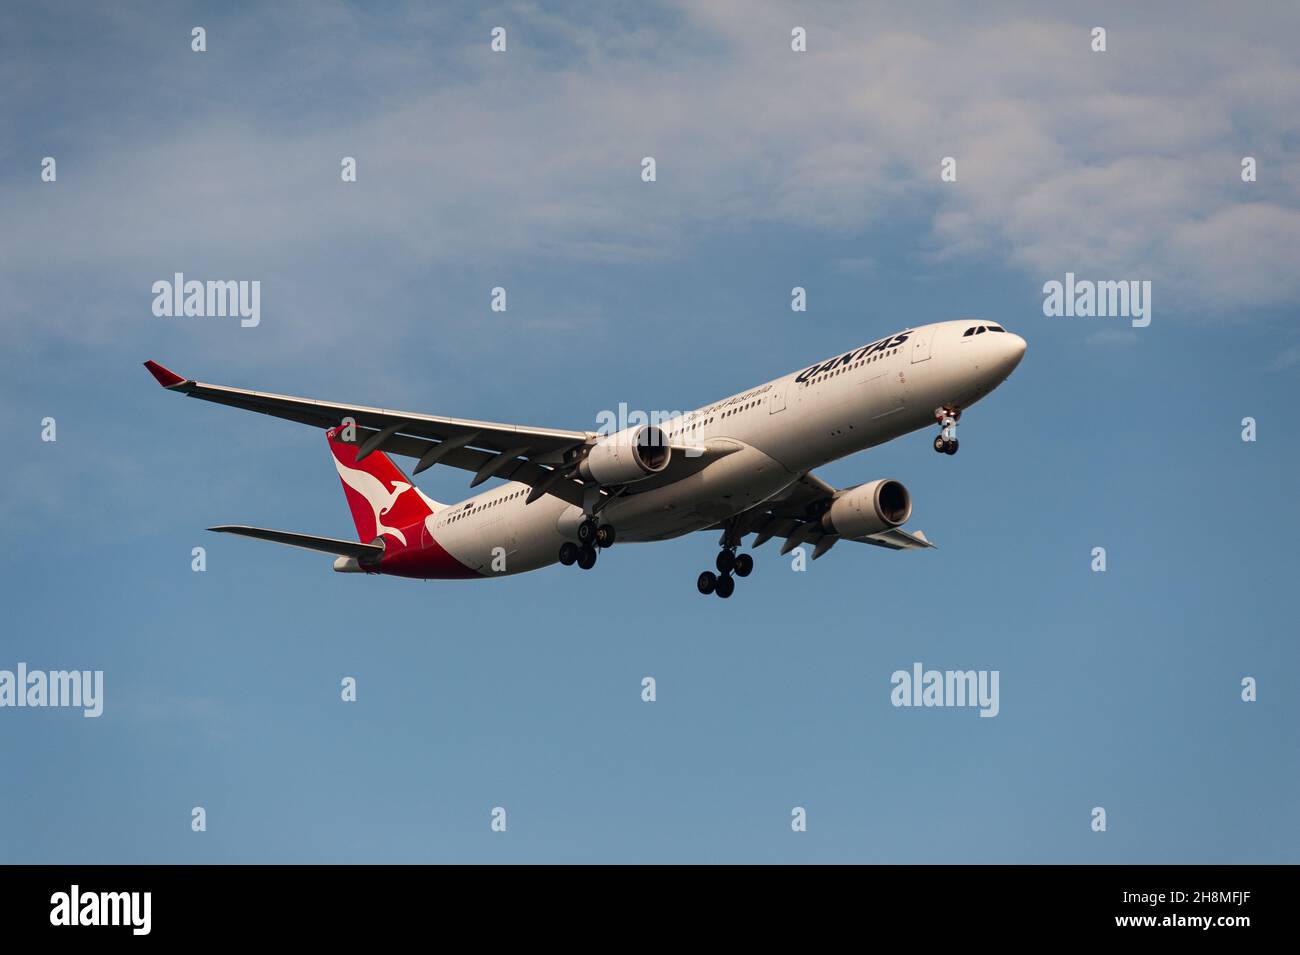 29.11.2021, Singapore, Republic of Singapore, Asia - Airbus A330 passenger aircraft of the Australian airline Qantas Airways approaches Changi Airport. Stock Photo